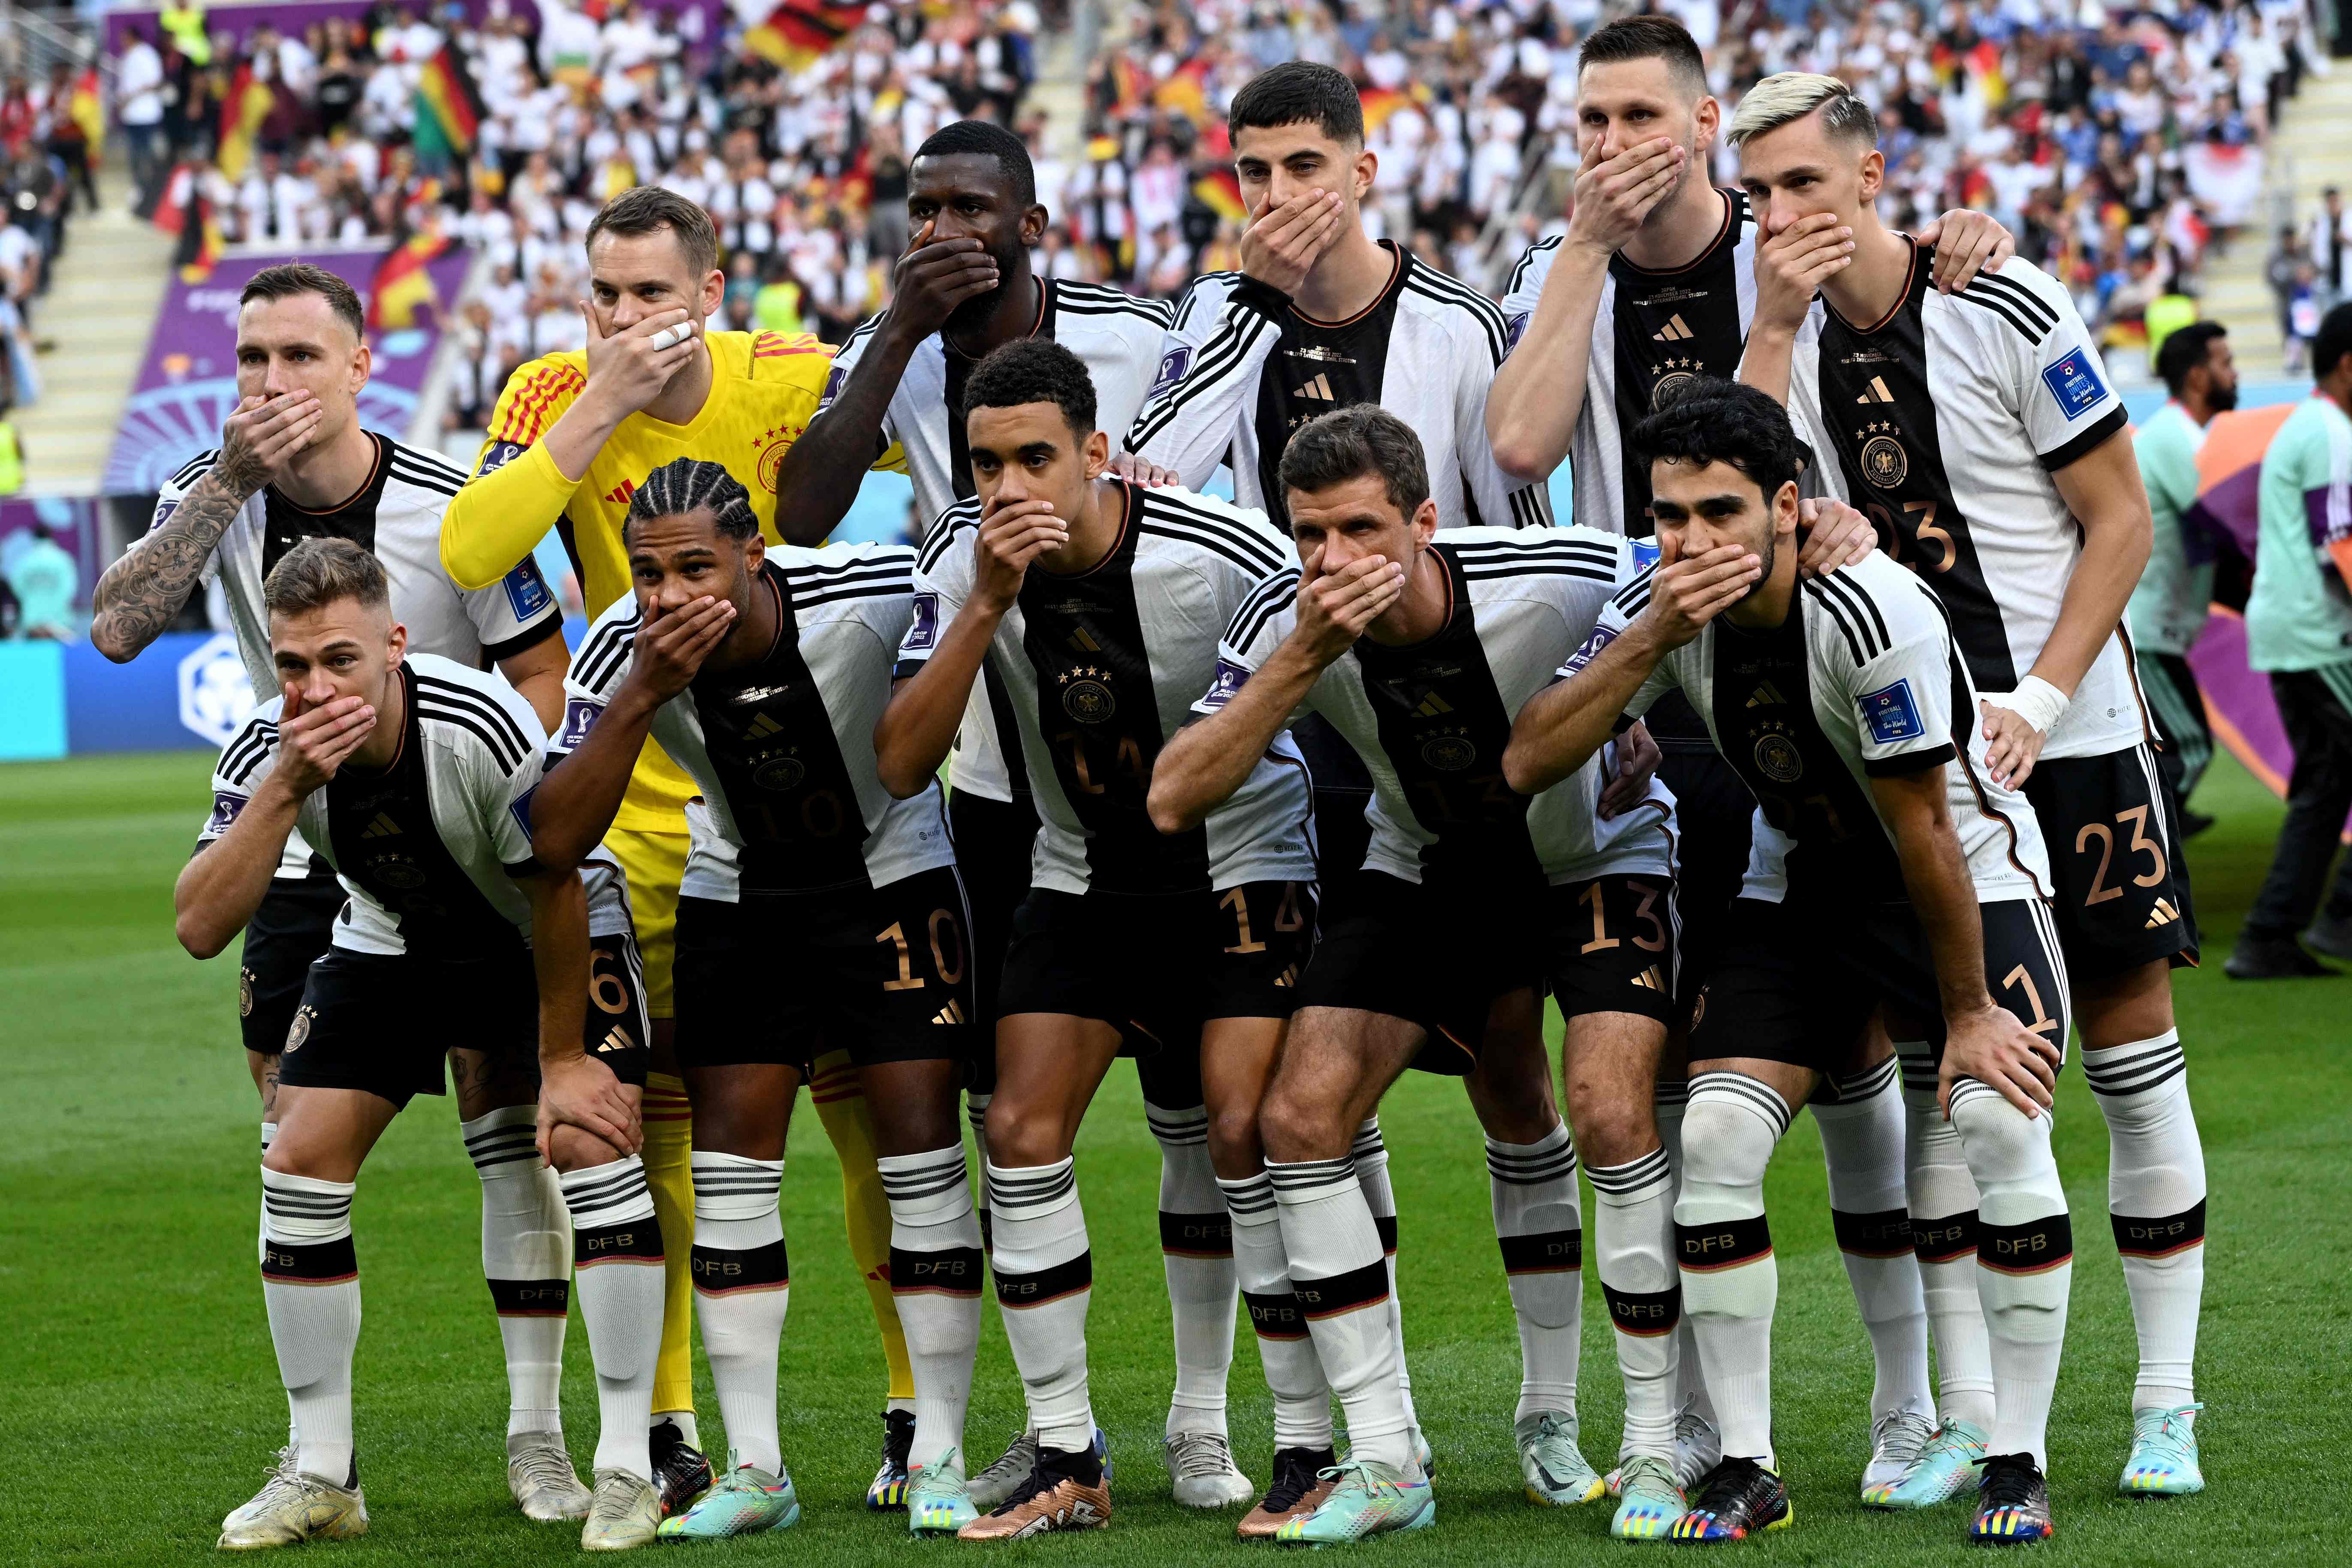 Players of Germany cover their mouths as they pose for the group picture ahead of the Qatar 2022 World Cup. Credit: AFP Photo